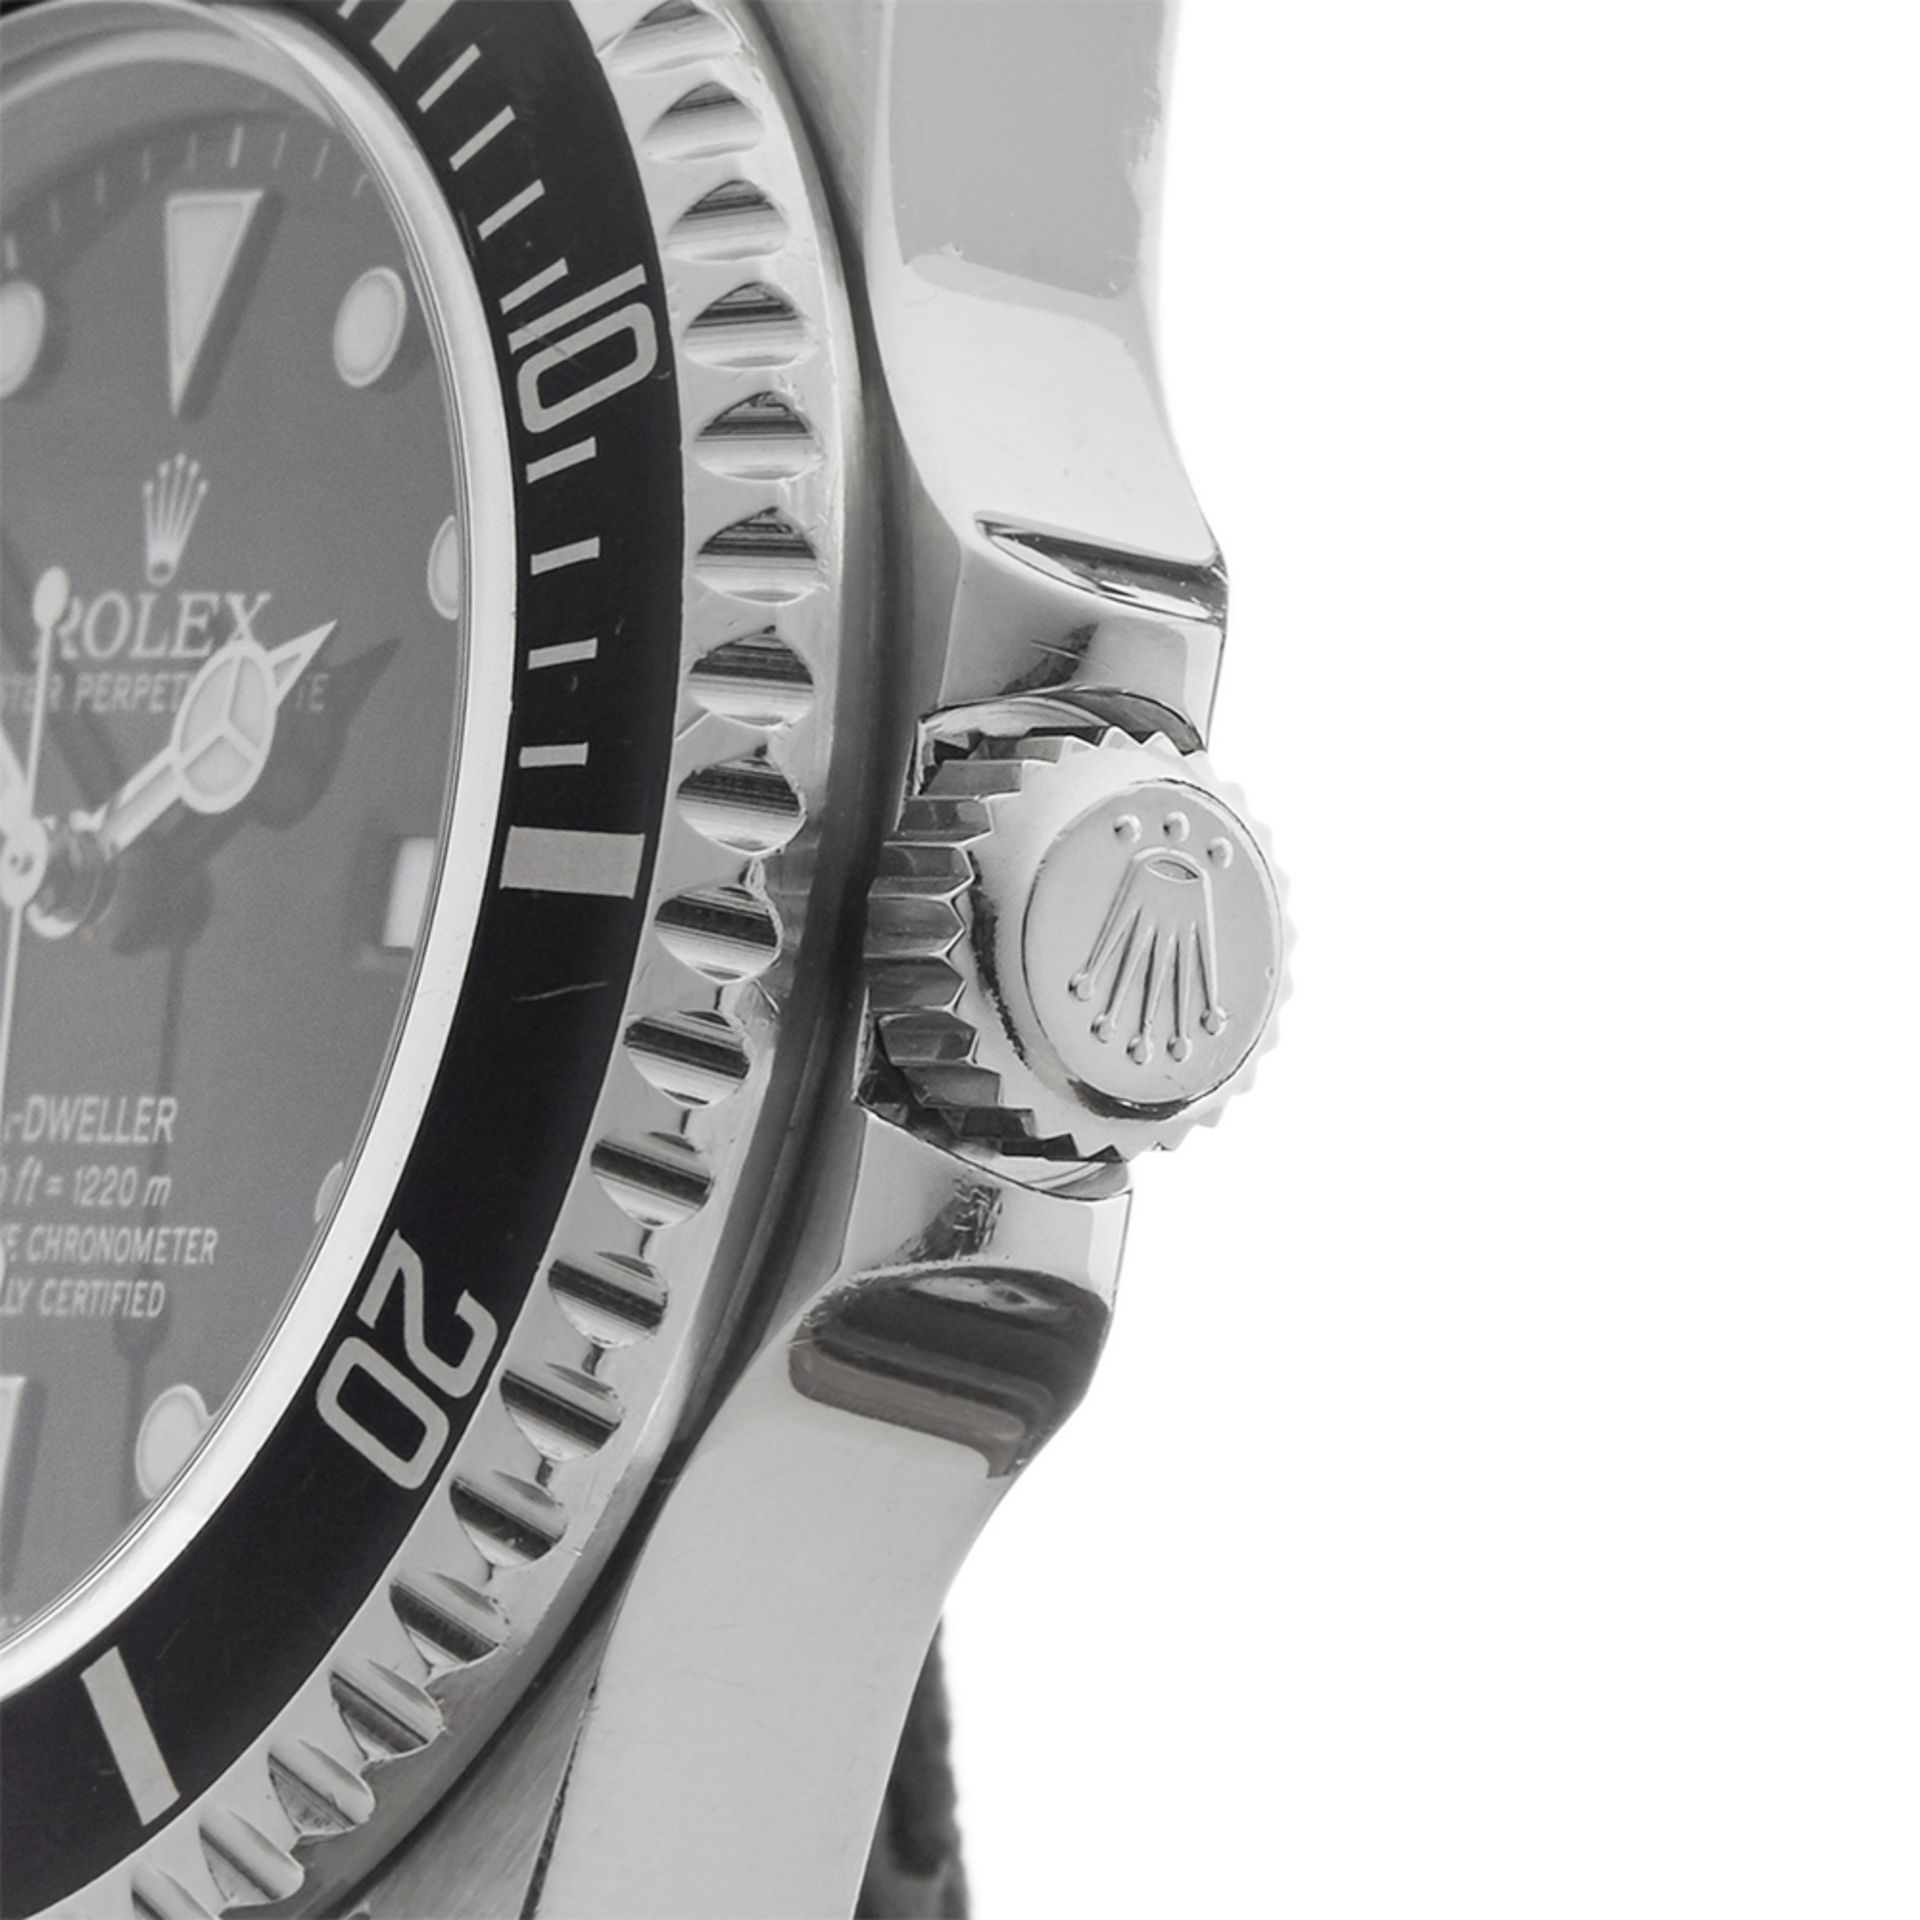 Rolex Sea-Dweller Transitional 40mm Stainless Steel - 16660 - Image 4 of 9